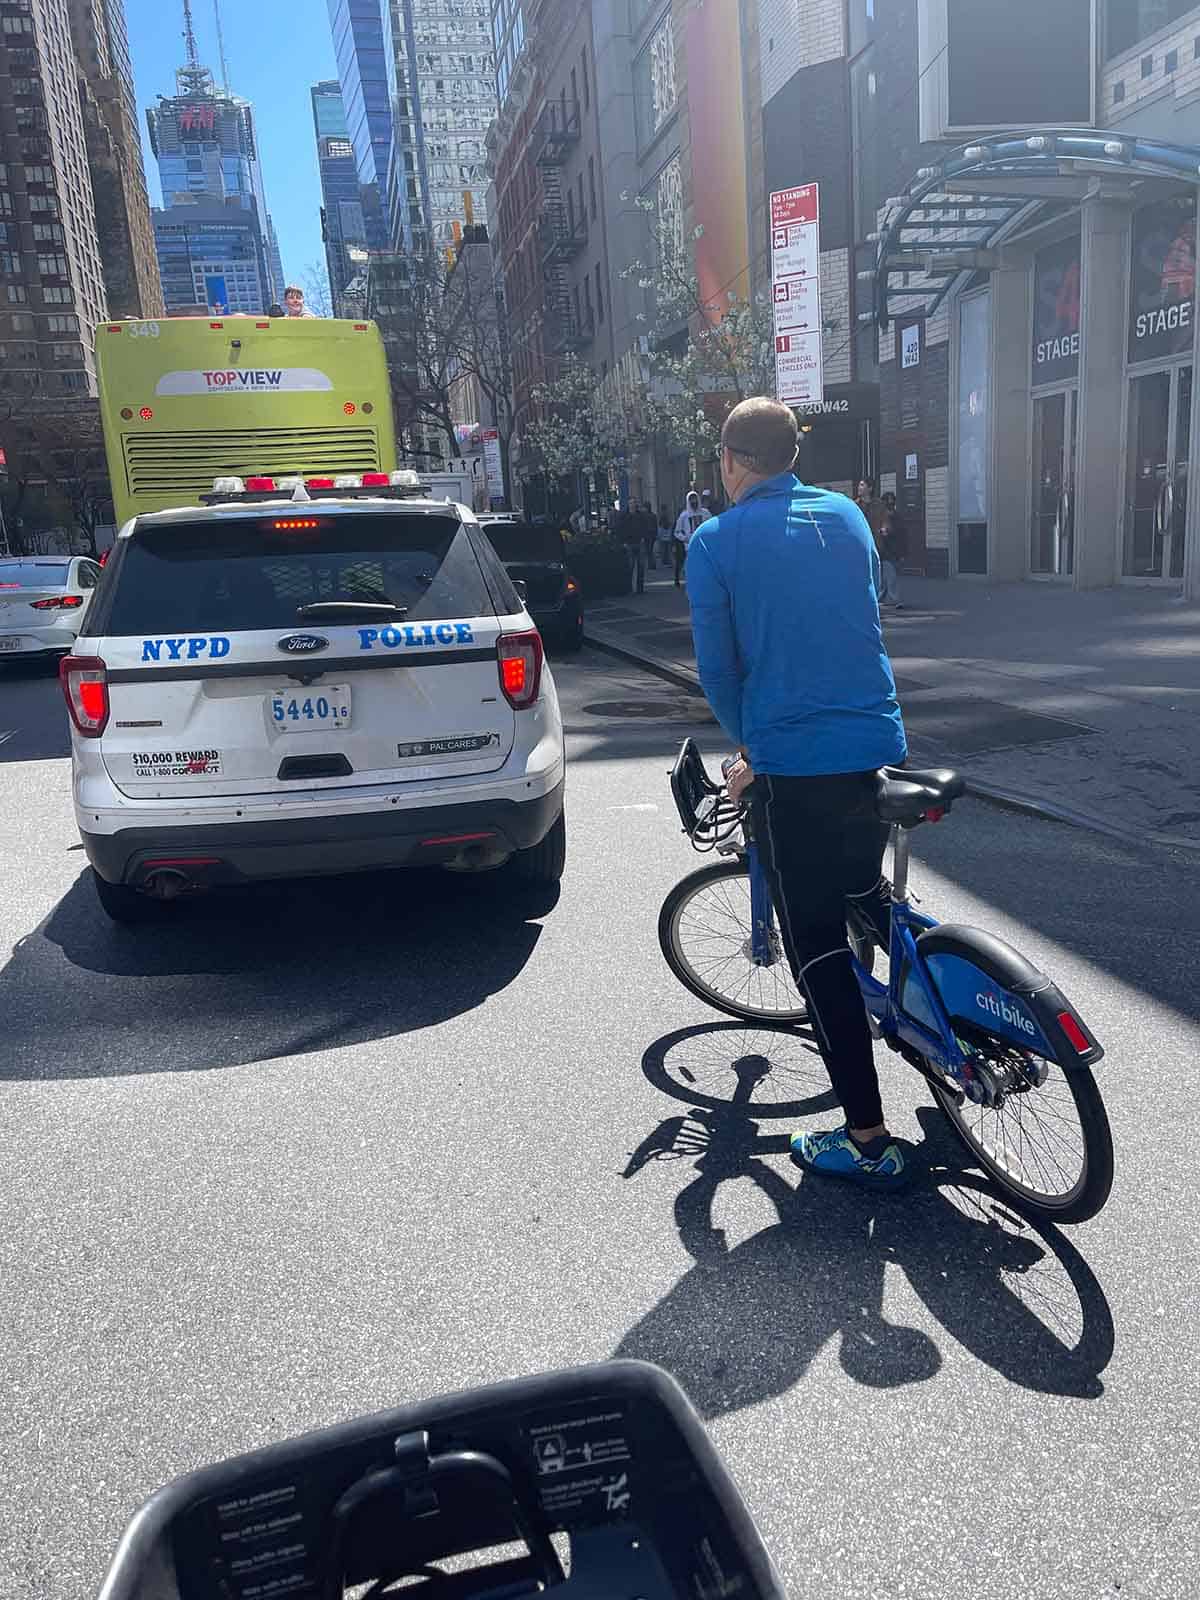 Mike riding bike in back of NYPD car.